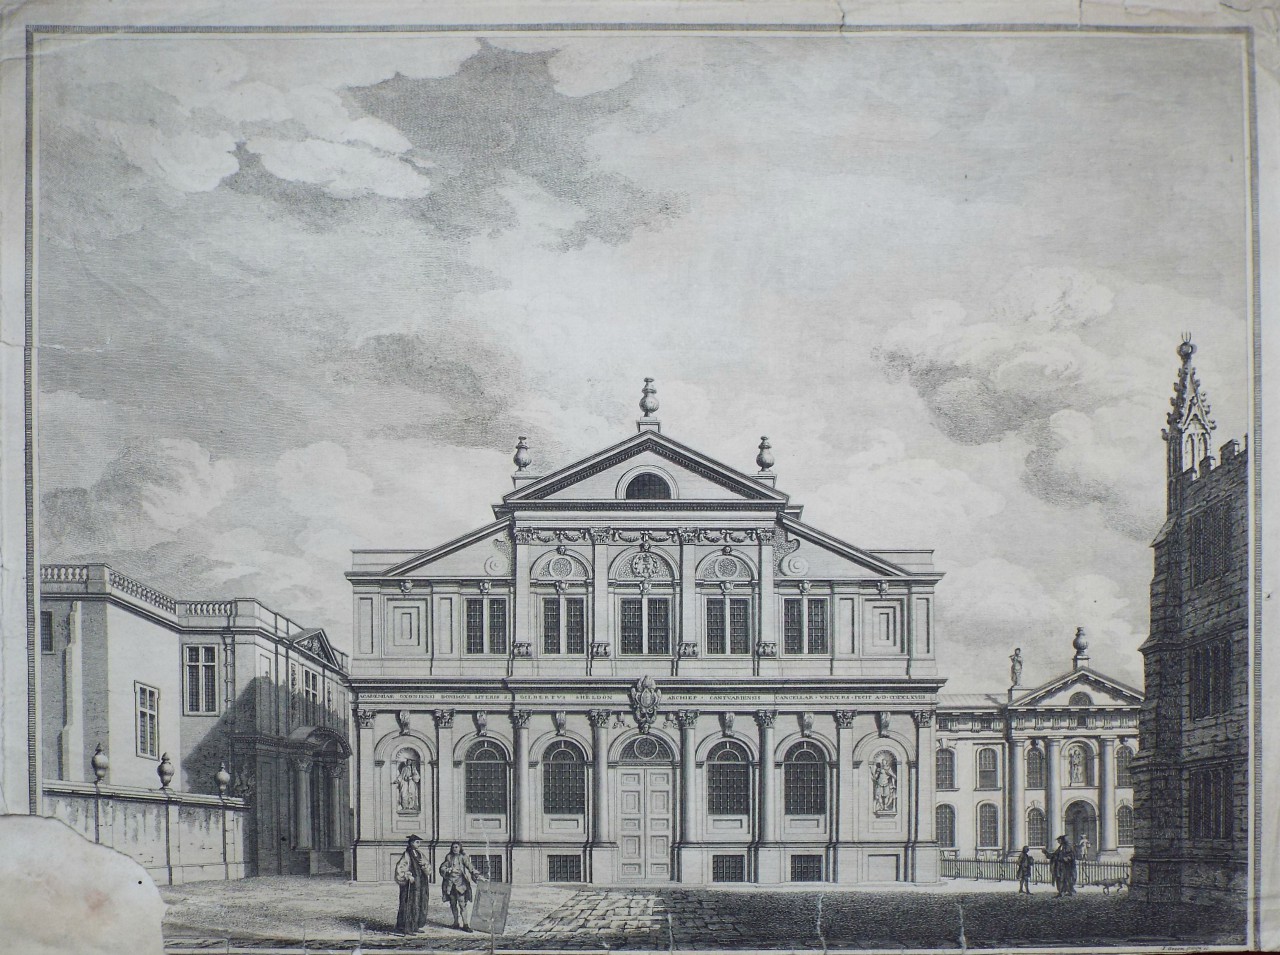 Print - South Front of the Sheldonian Theatre. - Green